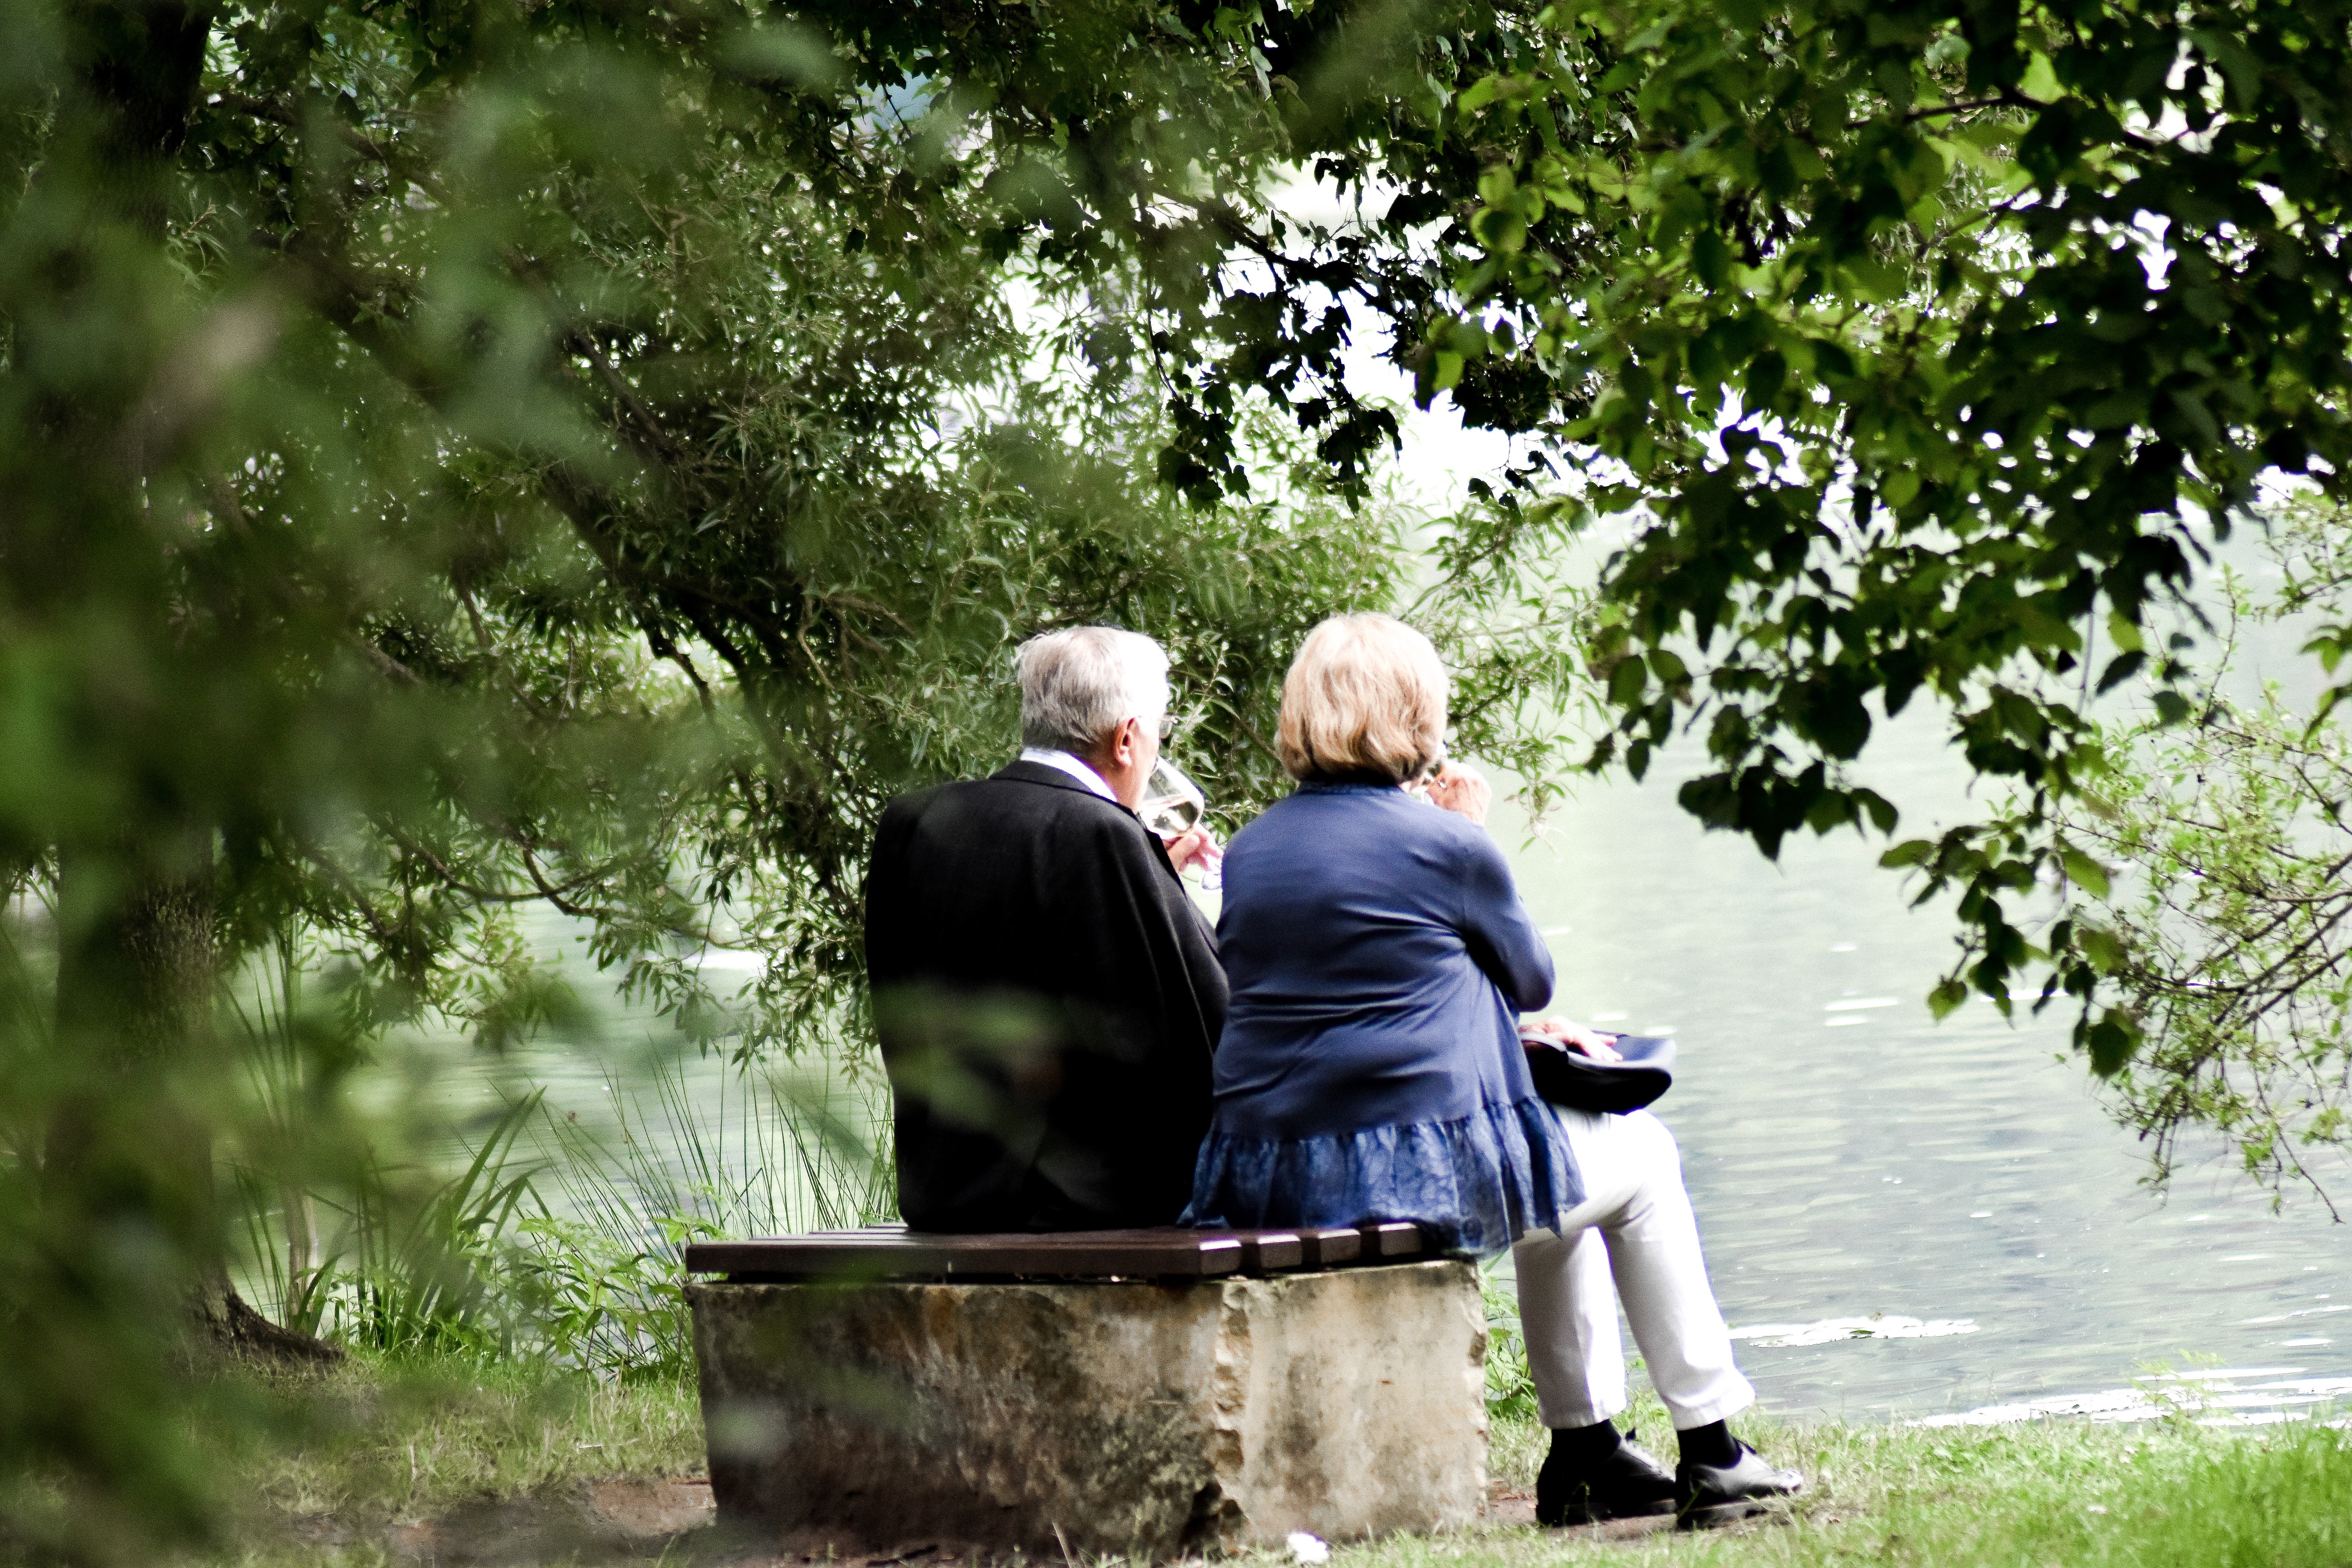 An old couple sitting on a park bench. | Source: Unsplash